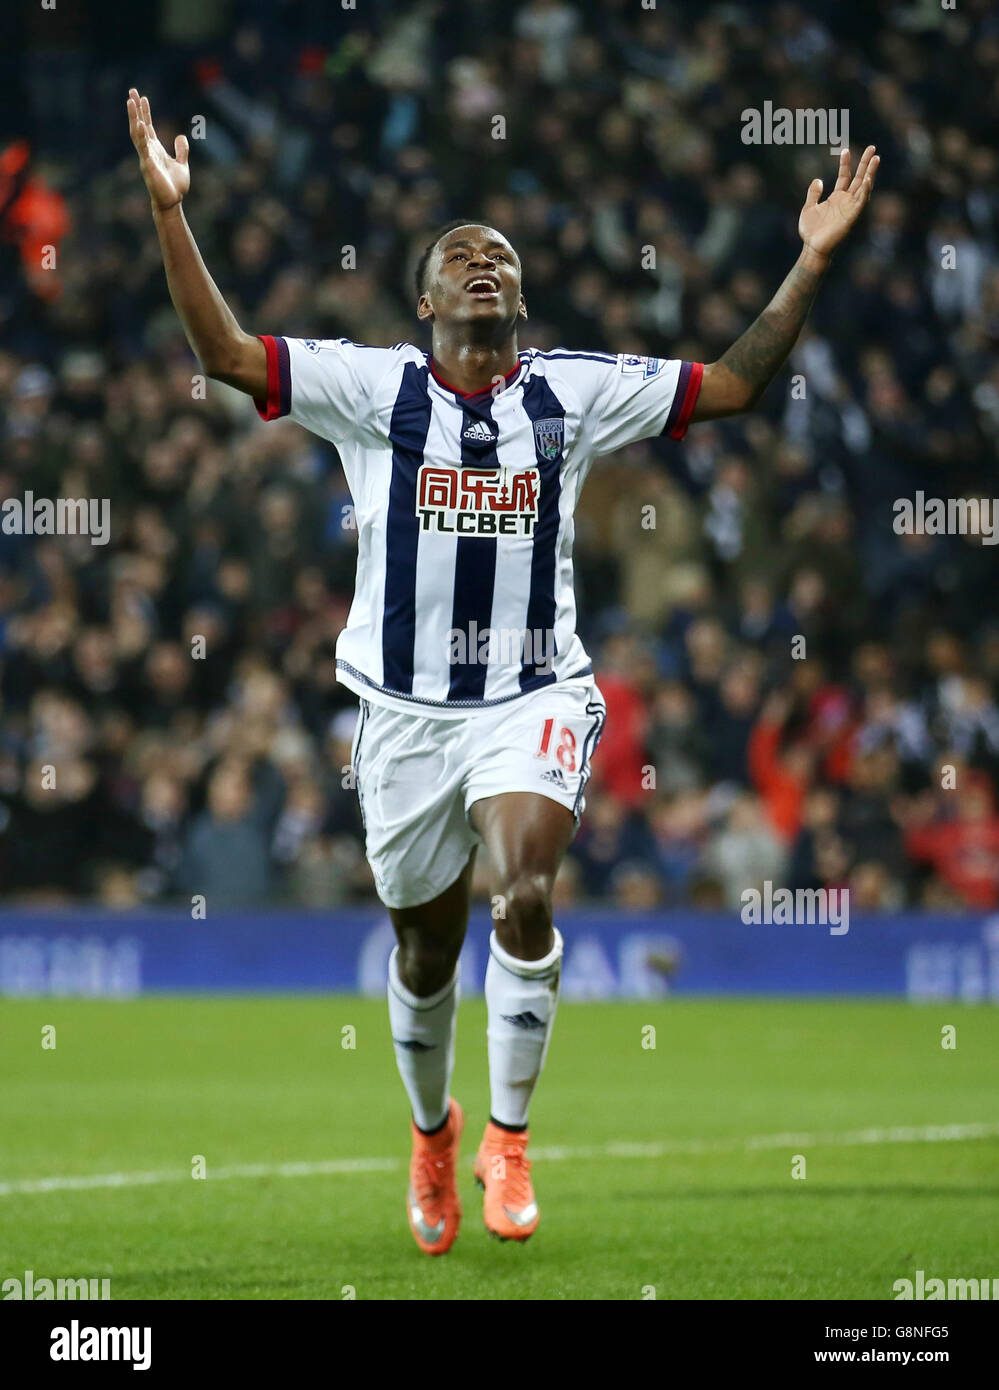 West Bromwich Albion's Saido Berahino celebrates scoring his side's third goal of the game during the Barclays Premier League match at The Hawthorns, West Bromwich. Stock Photo